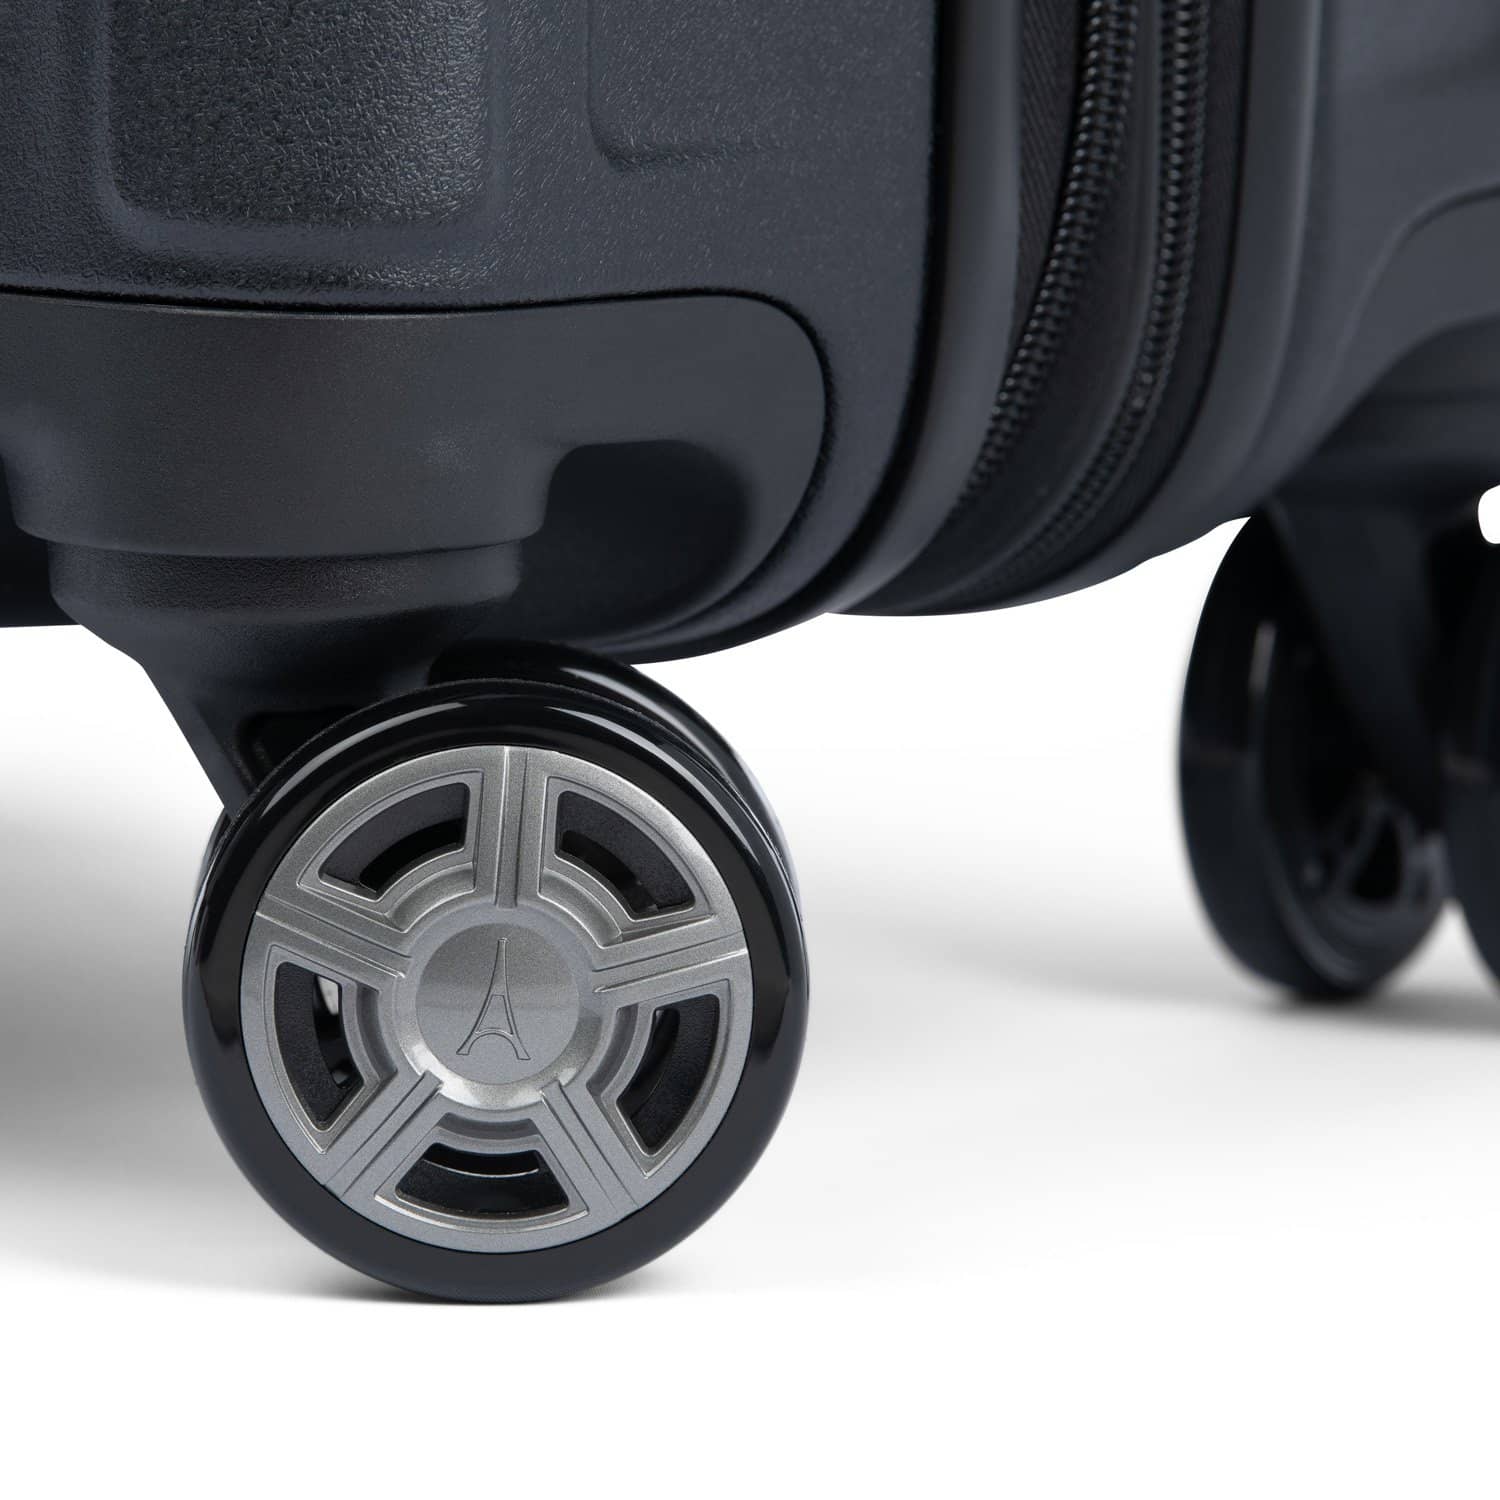 Expandable Carry-On Hardside Spinner | Platinum Elite by Travelpro